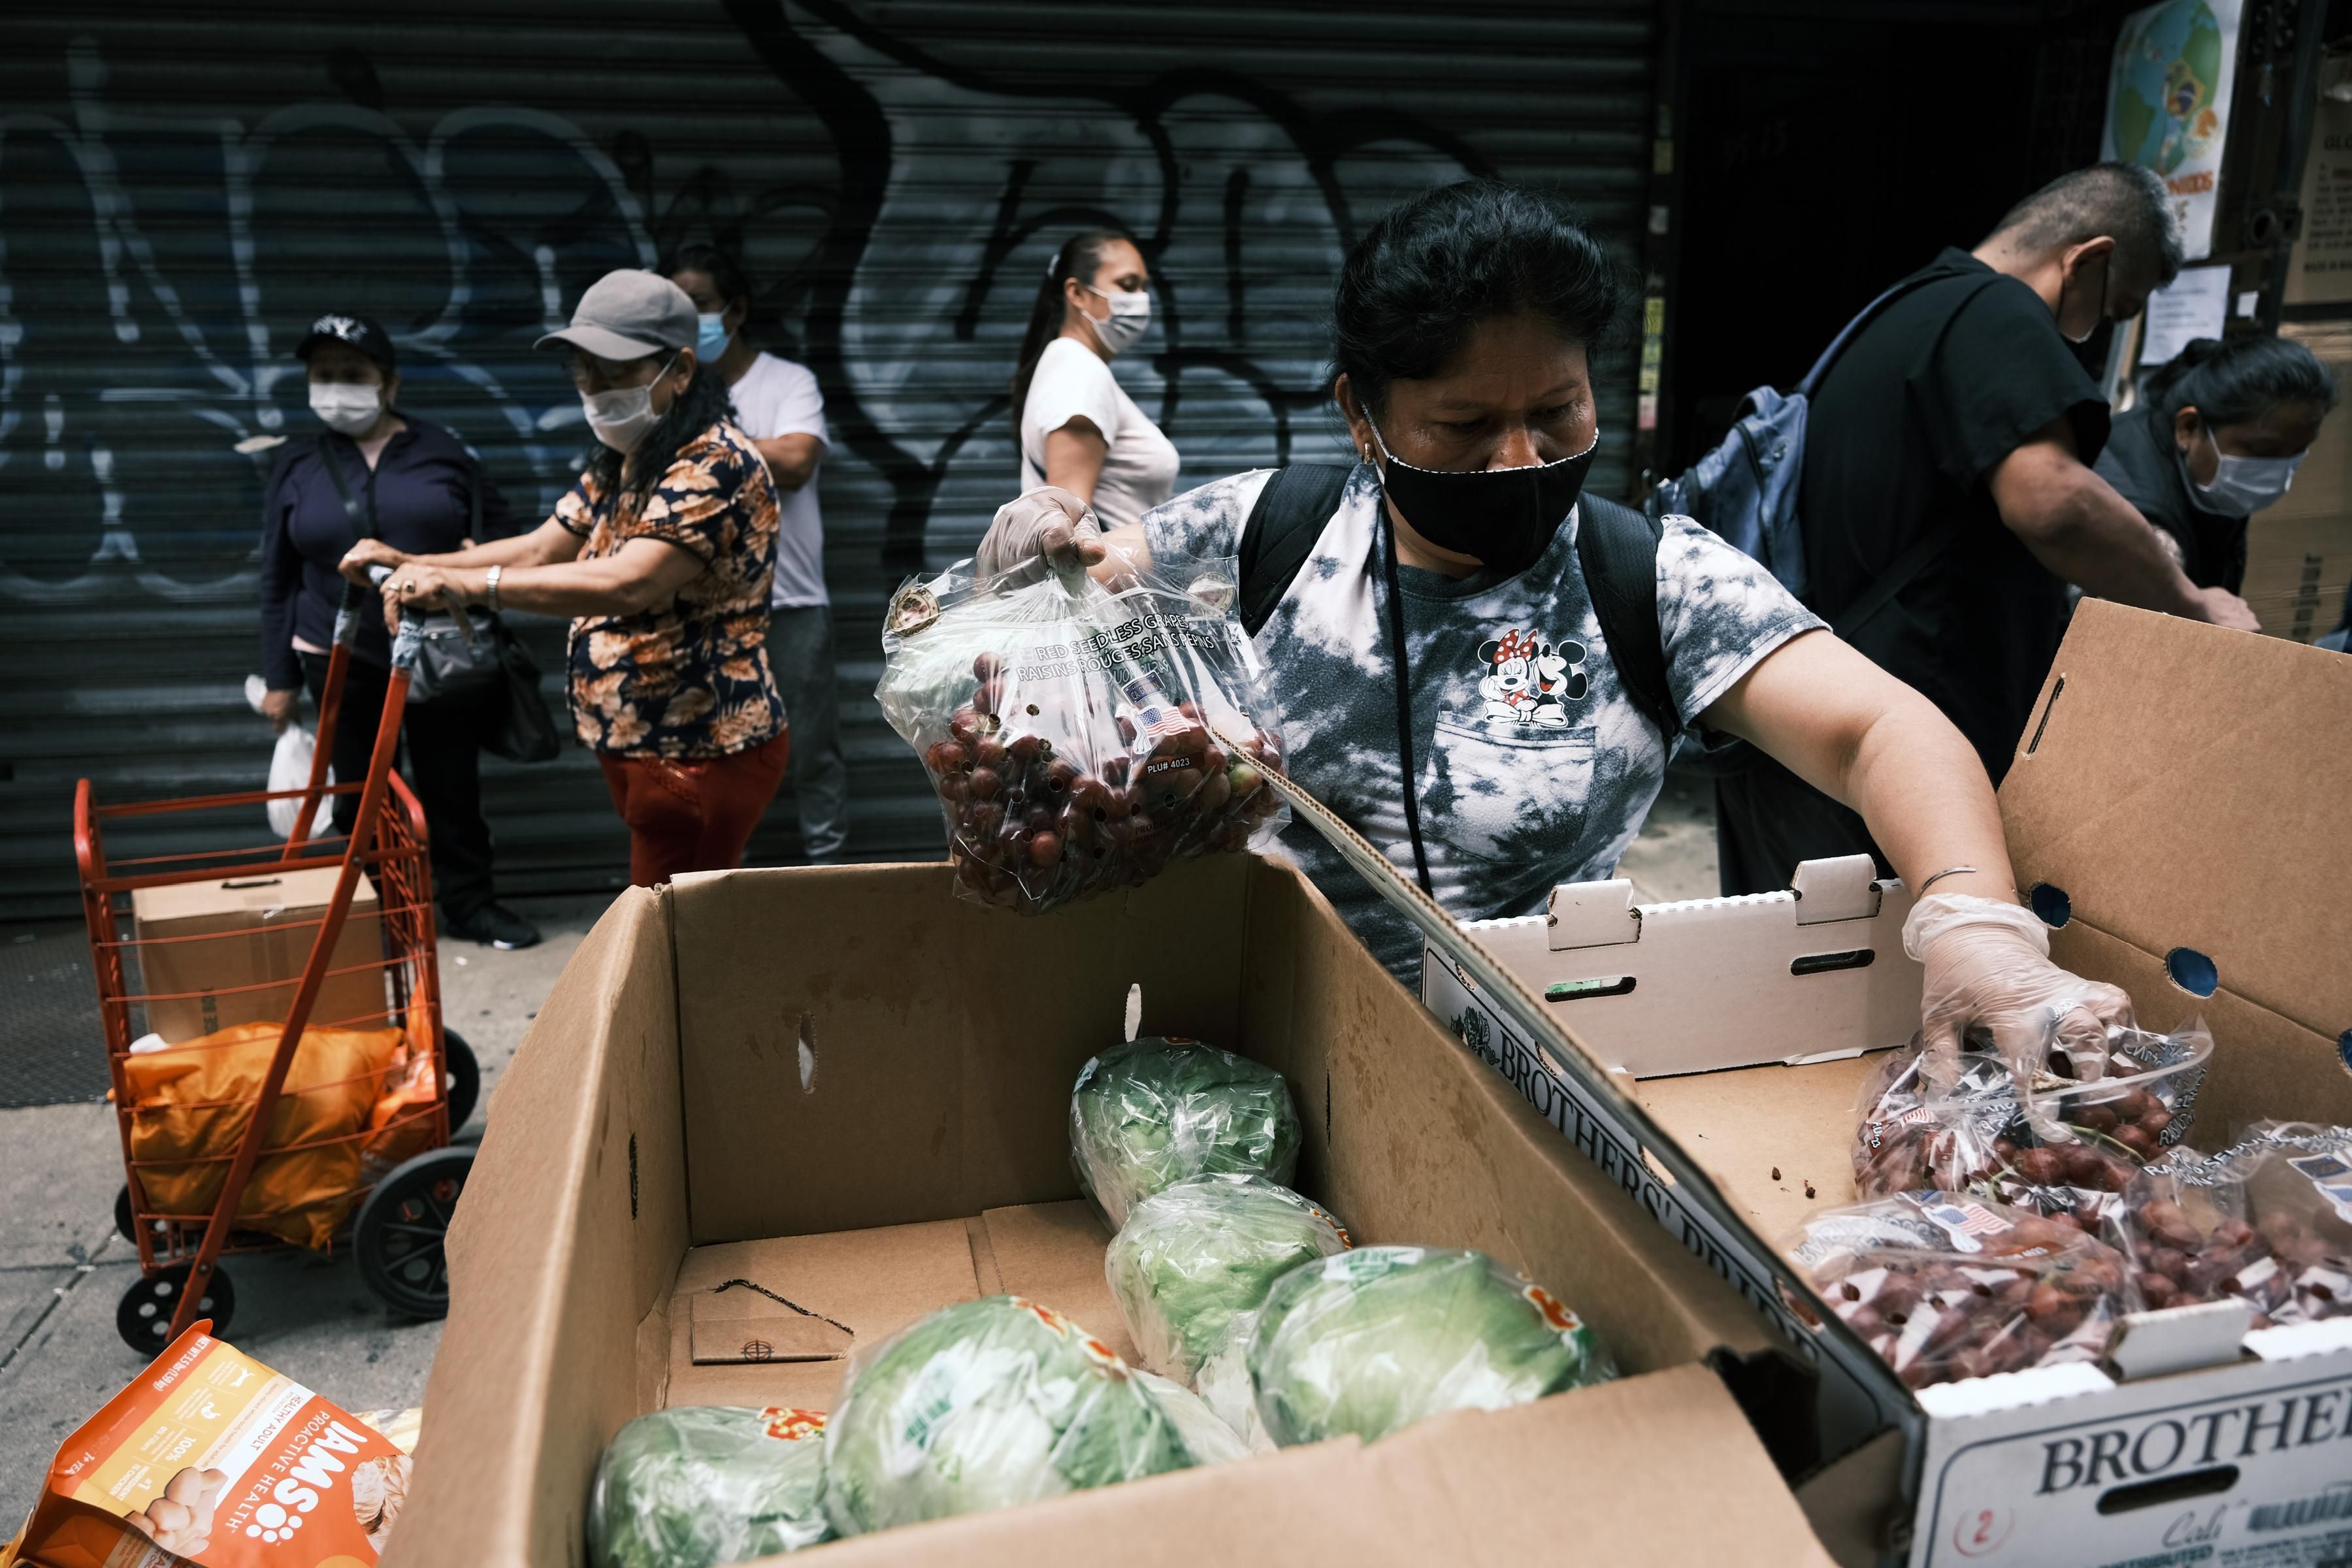 A person picks up food at a charity in New York City